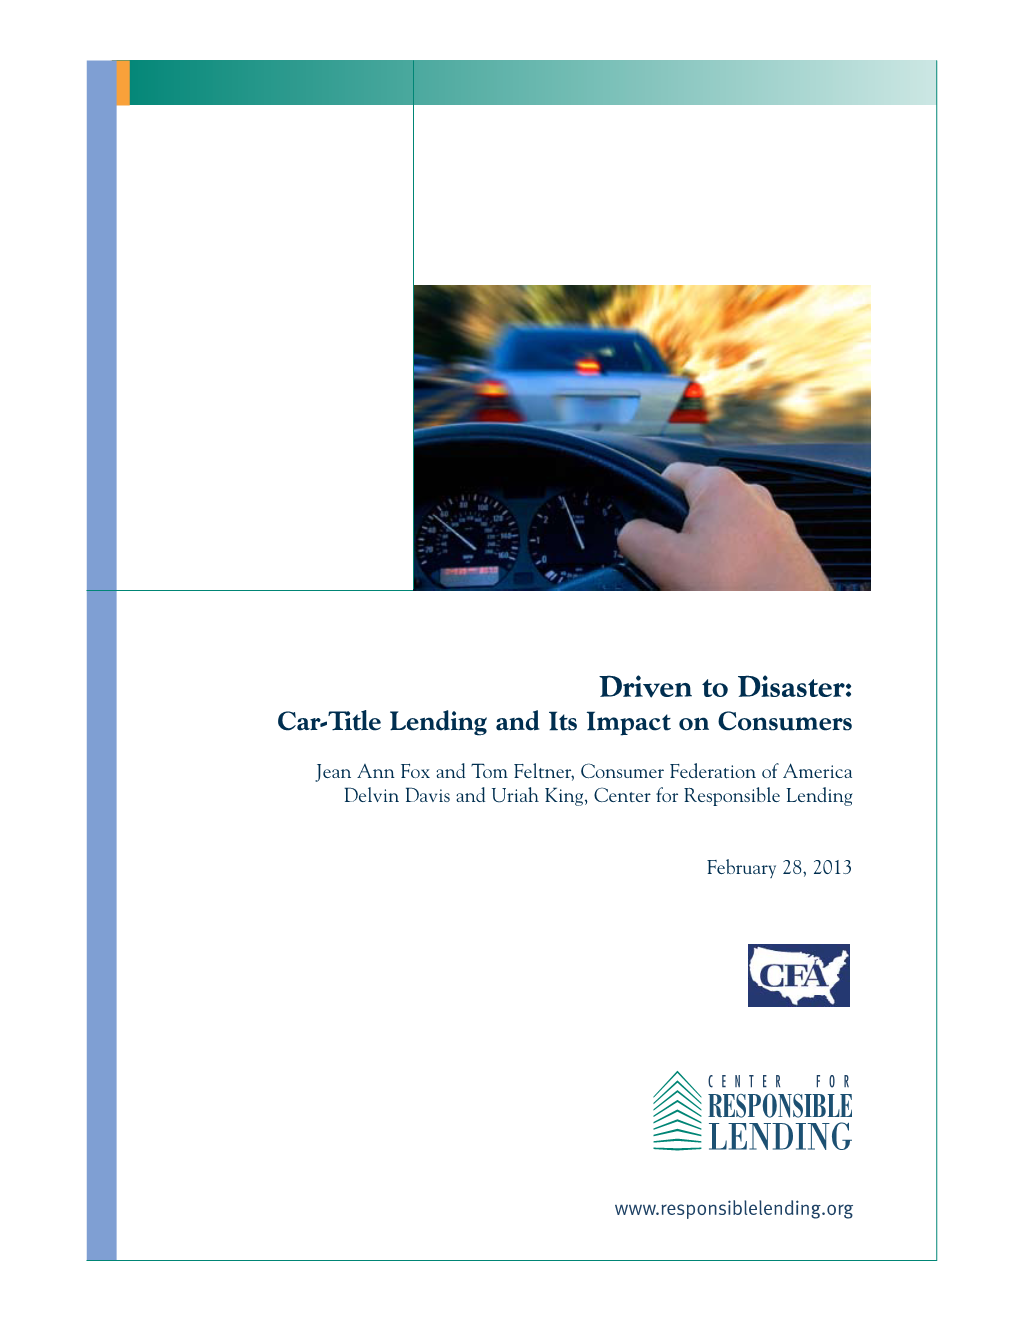 Driven to Disaster: Car-Title Lending and Its Impact on Consumers